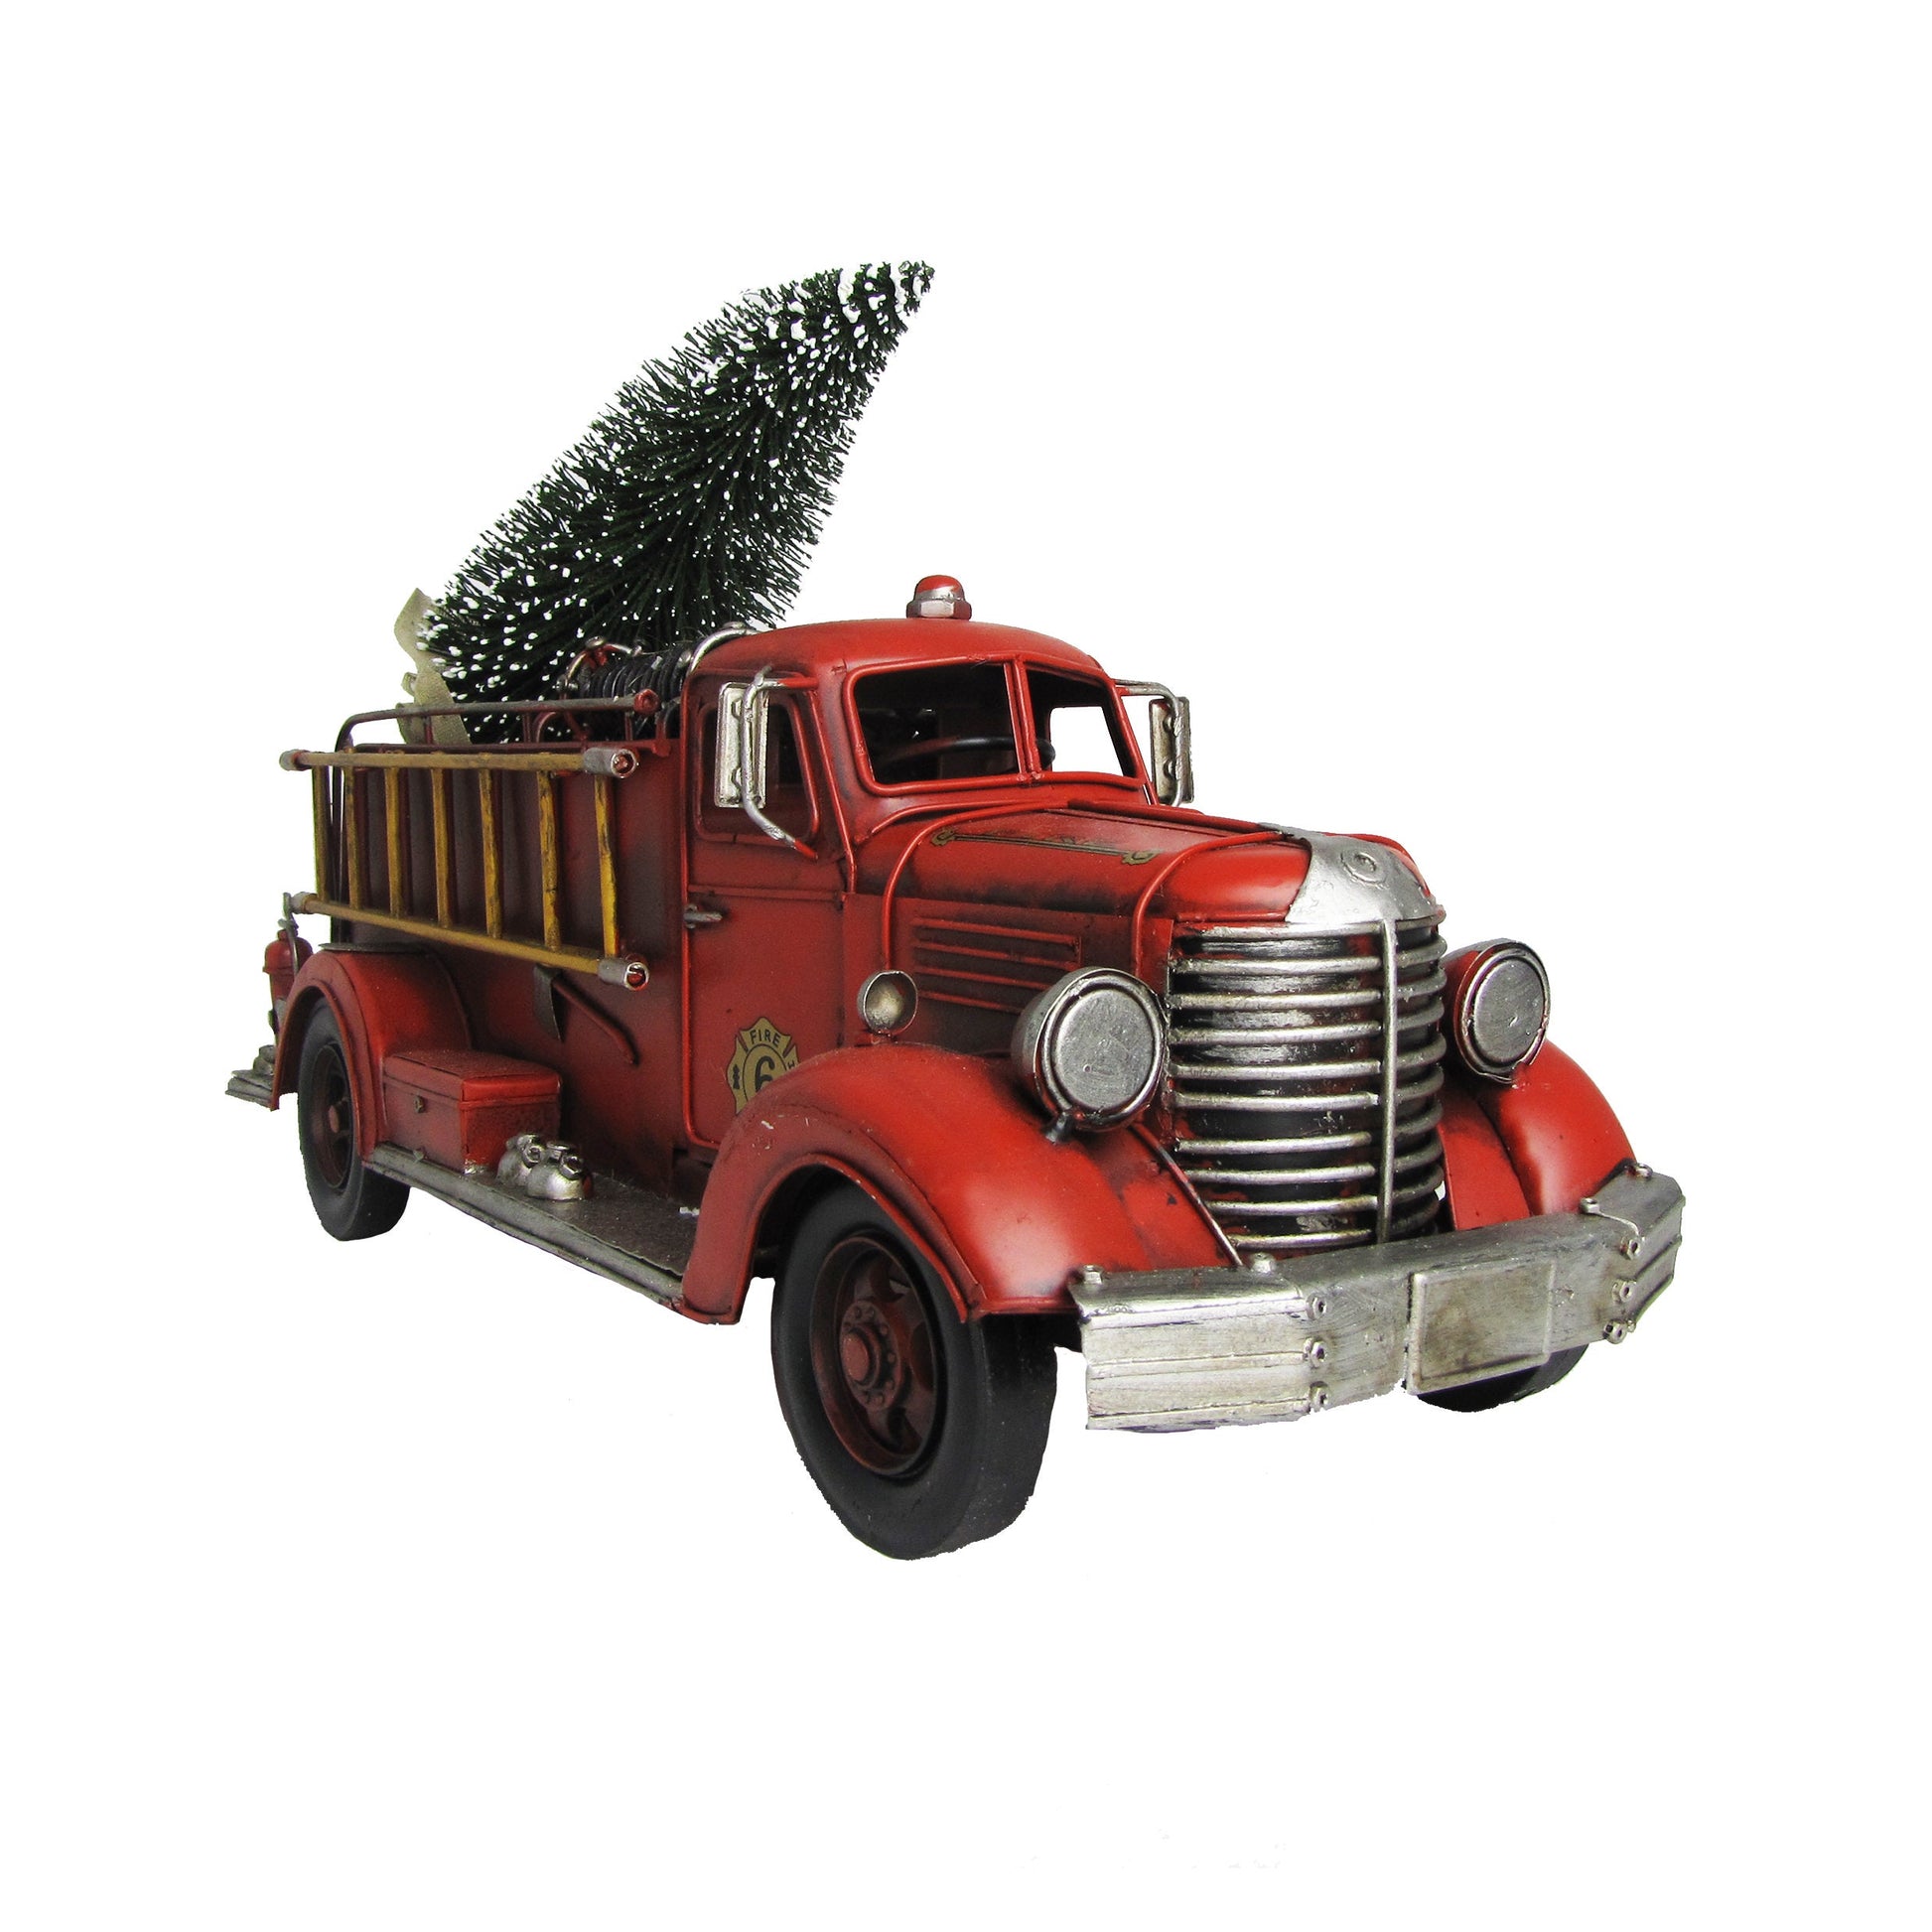 1940's Vintage Style Fire Truck with Christmas Tree – Becca Lynn